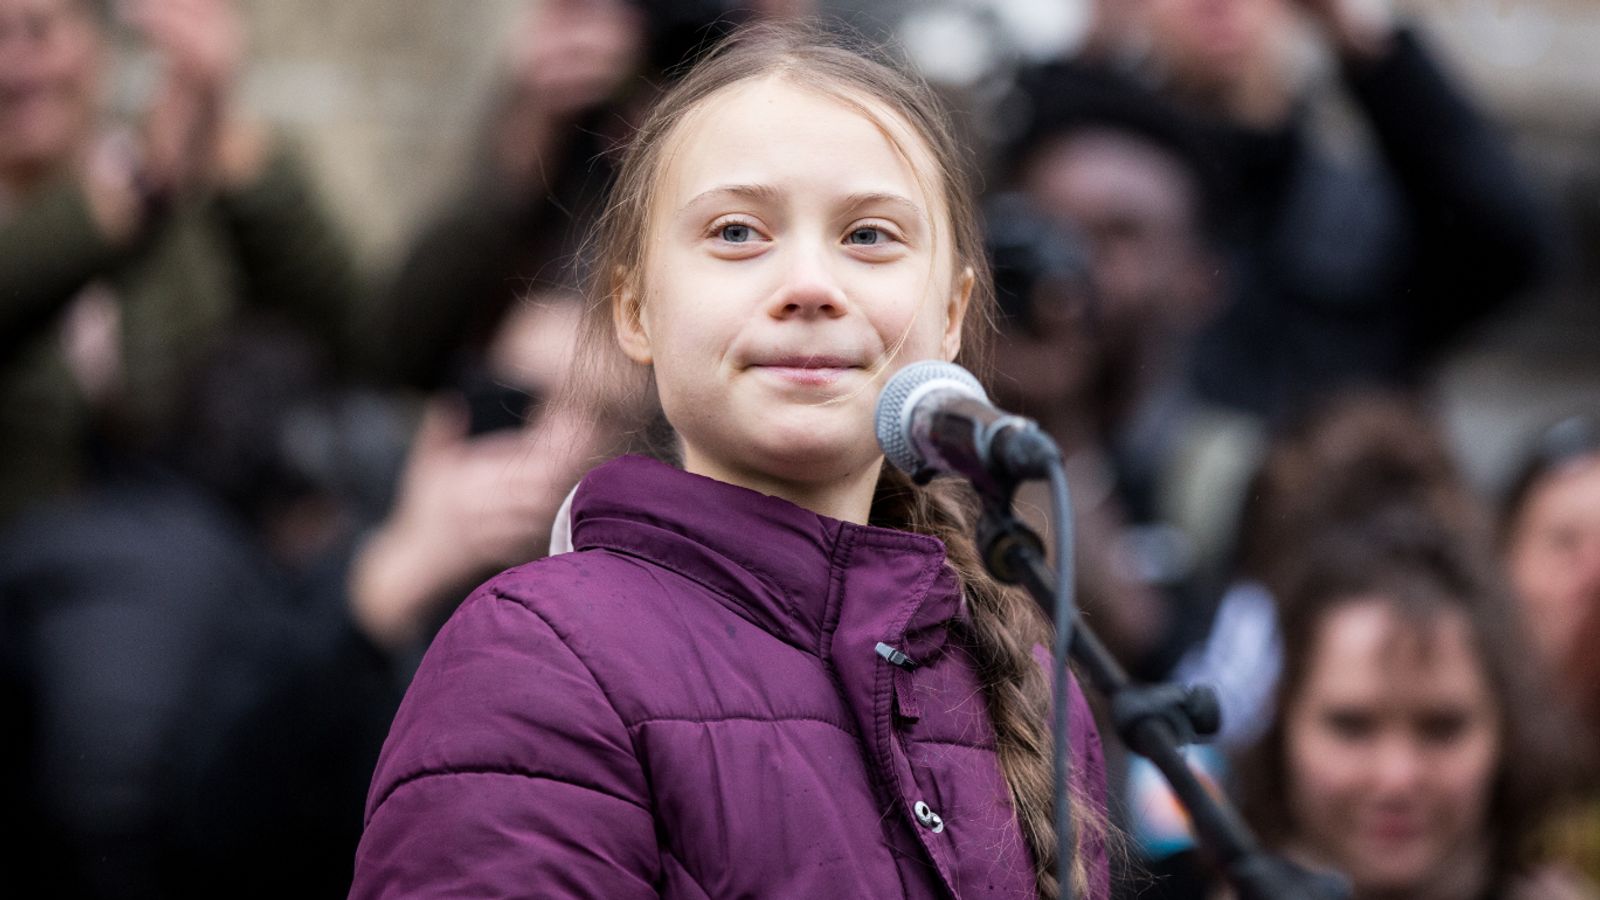 Greta Thunberg wins €1m climate change prize - but is giving it away 'as quickly as possible' - Sky News